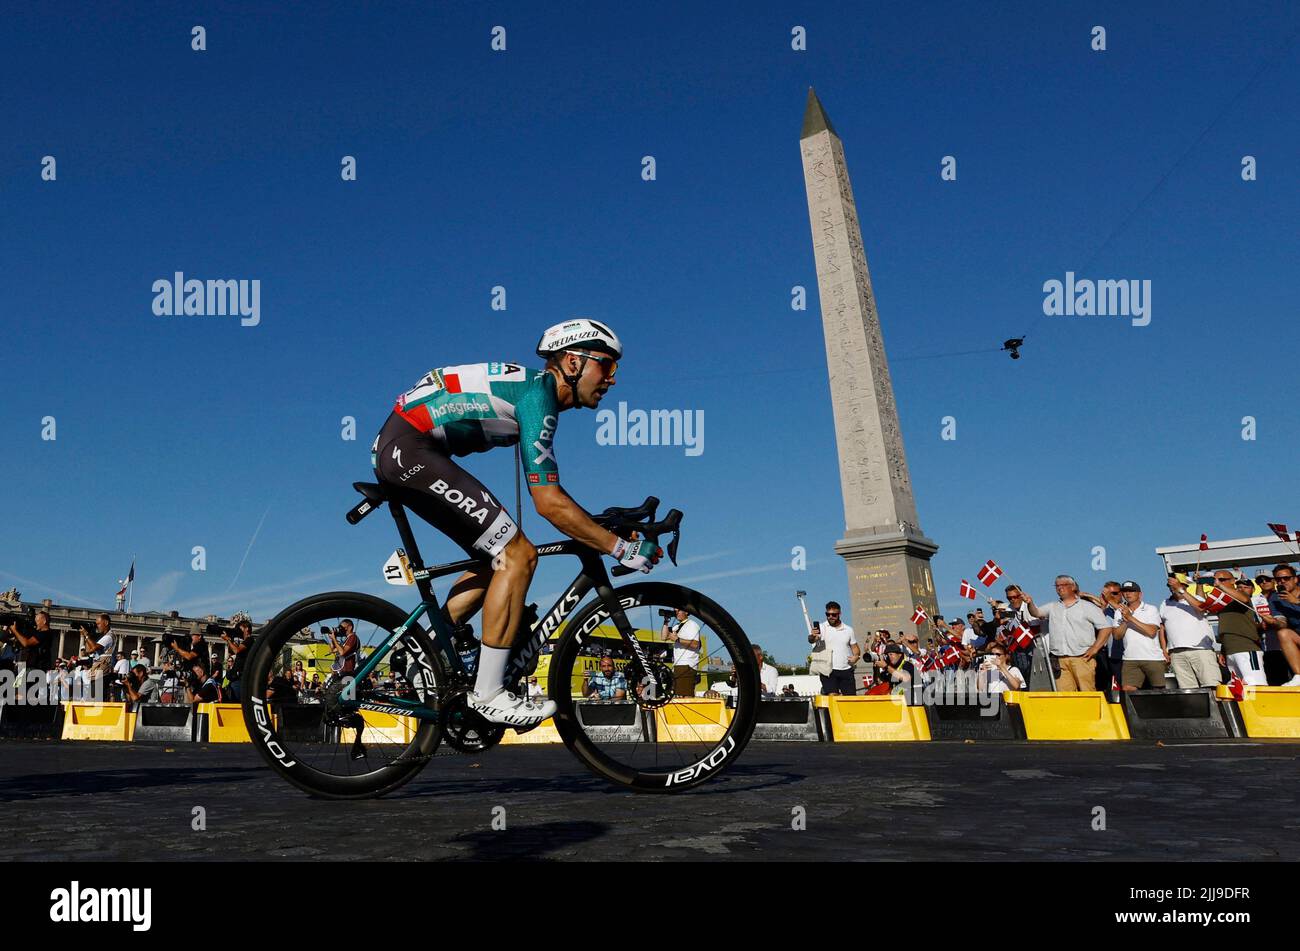 Cycling - Tour de France - Stage 21 - Paris La Defense Arena to Champs-Elysees - France - July 24, 2022 Bora - Hansgrohe's Maximilian Schachmann in action during stage 21 REUTERS/Gonzalo Fuentes Stock Photo